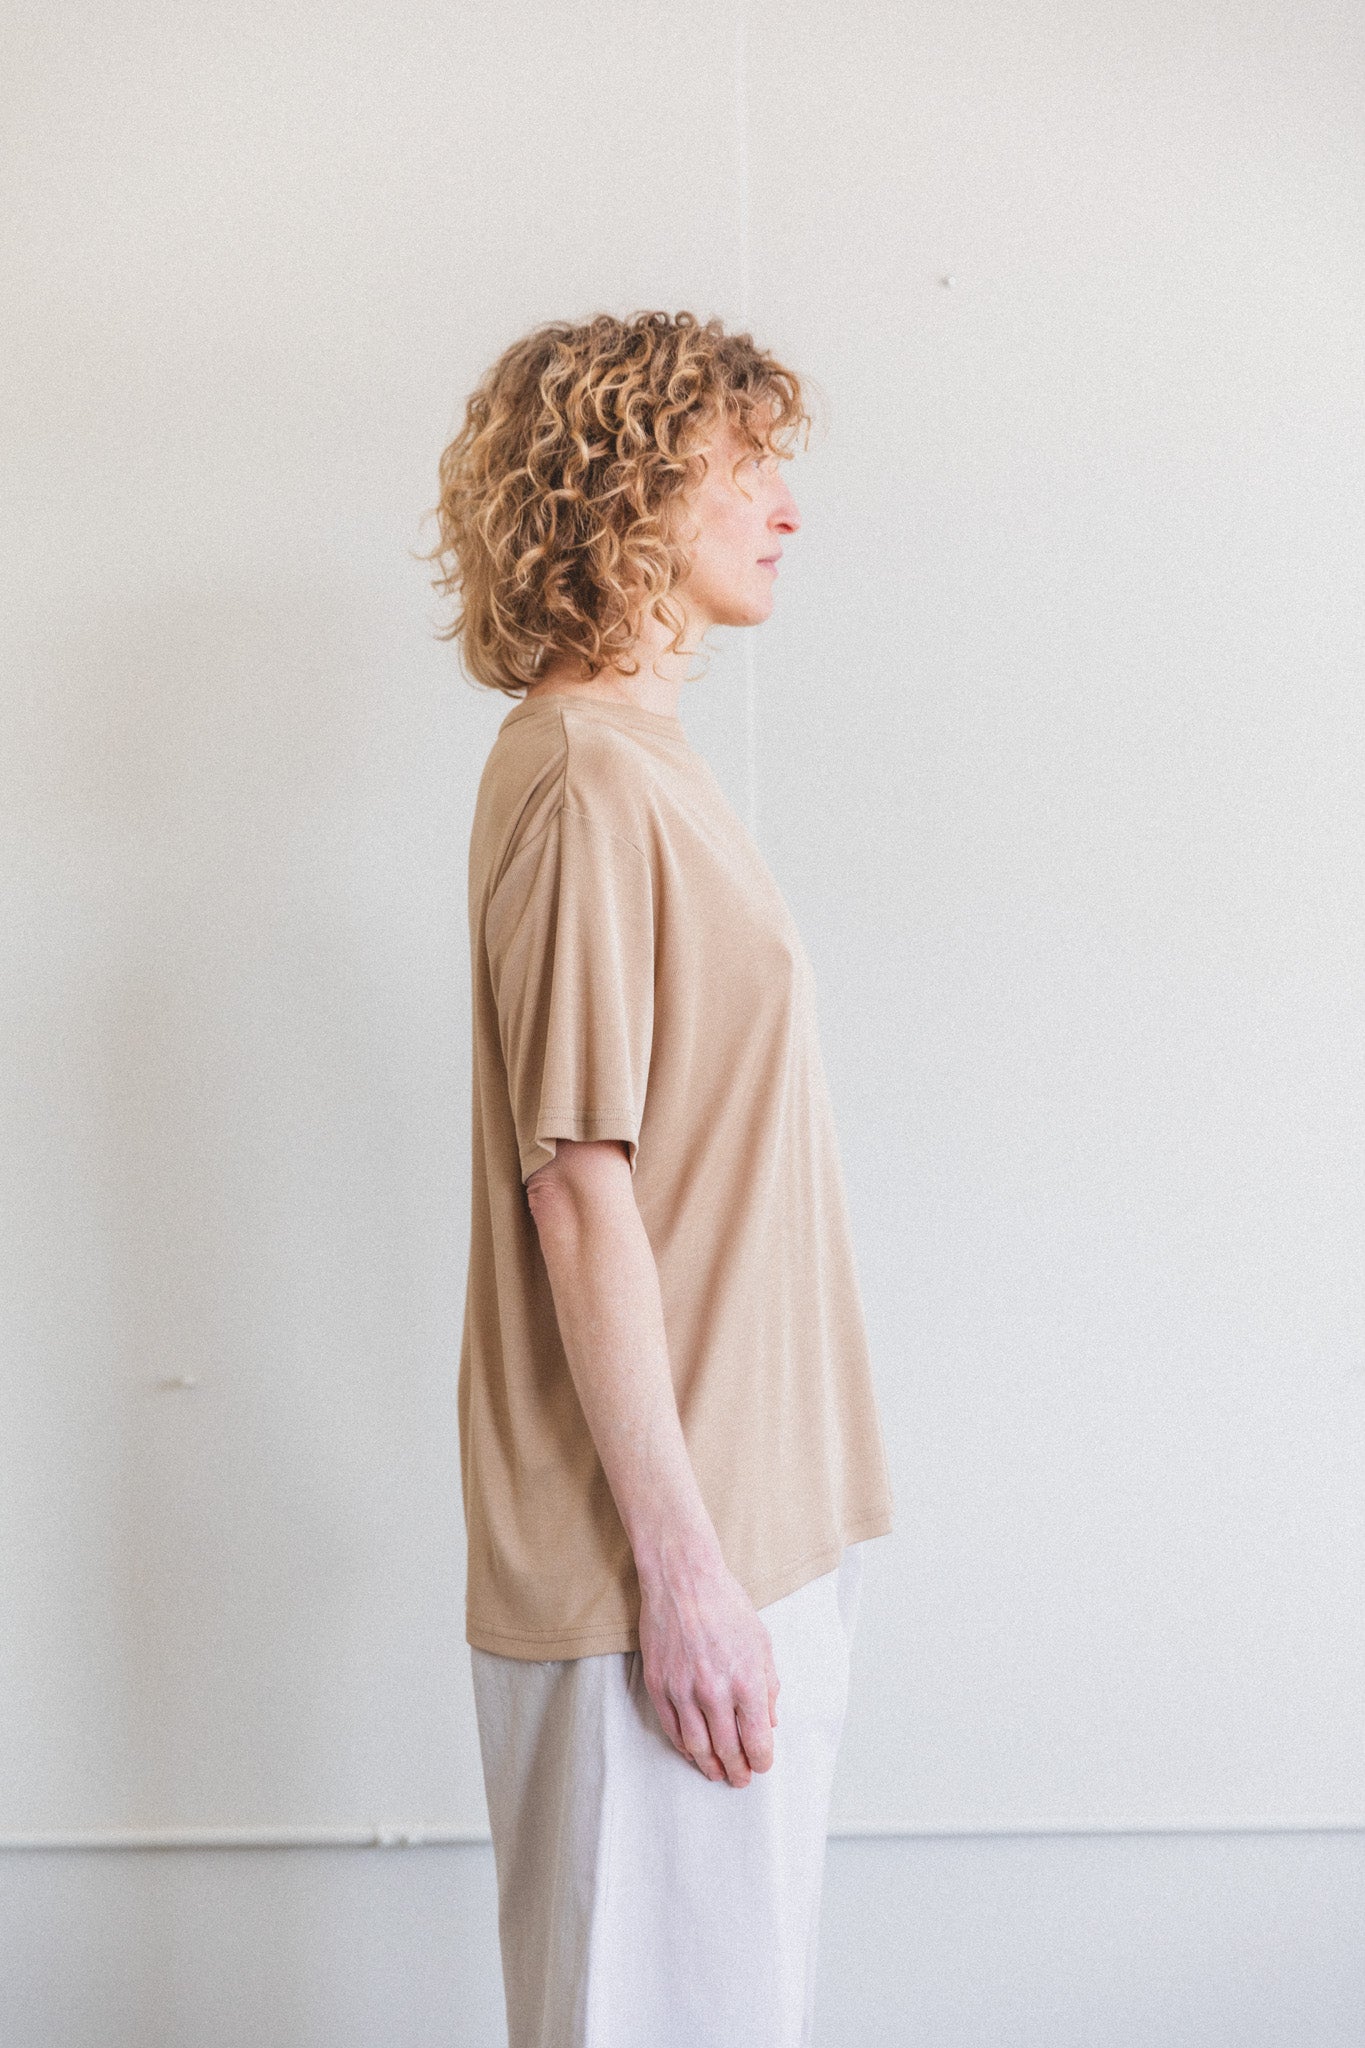 ROND JERSEY KNIT TEE IN SAND LYOCELL